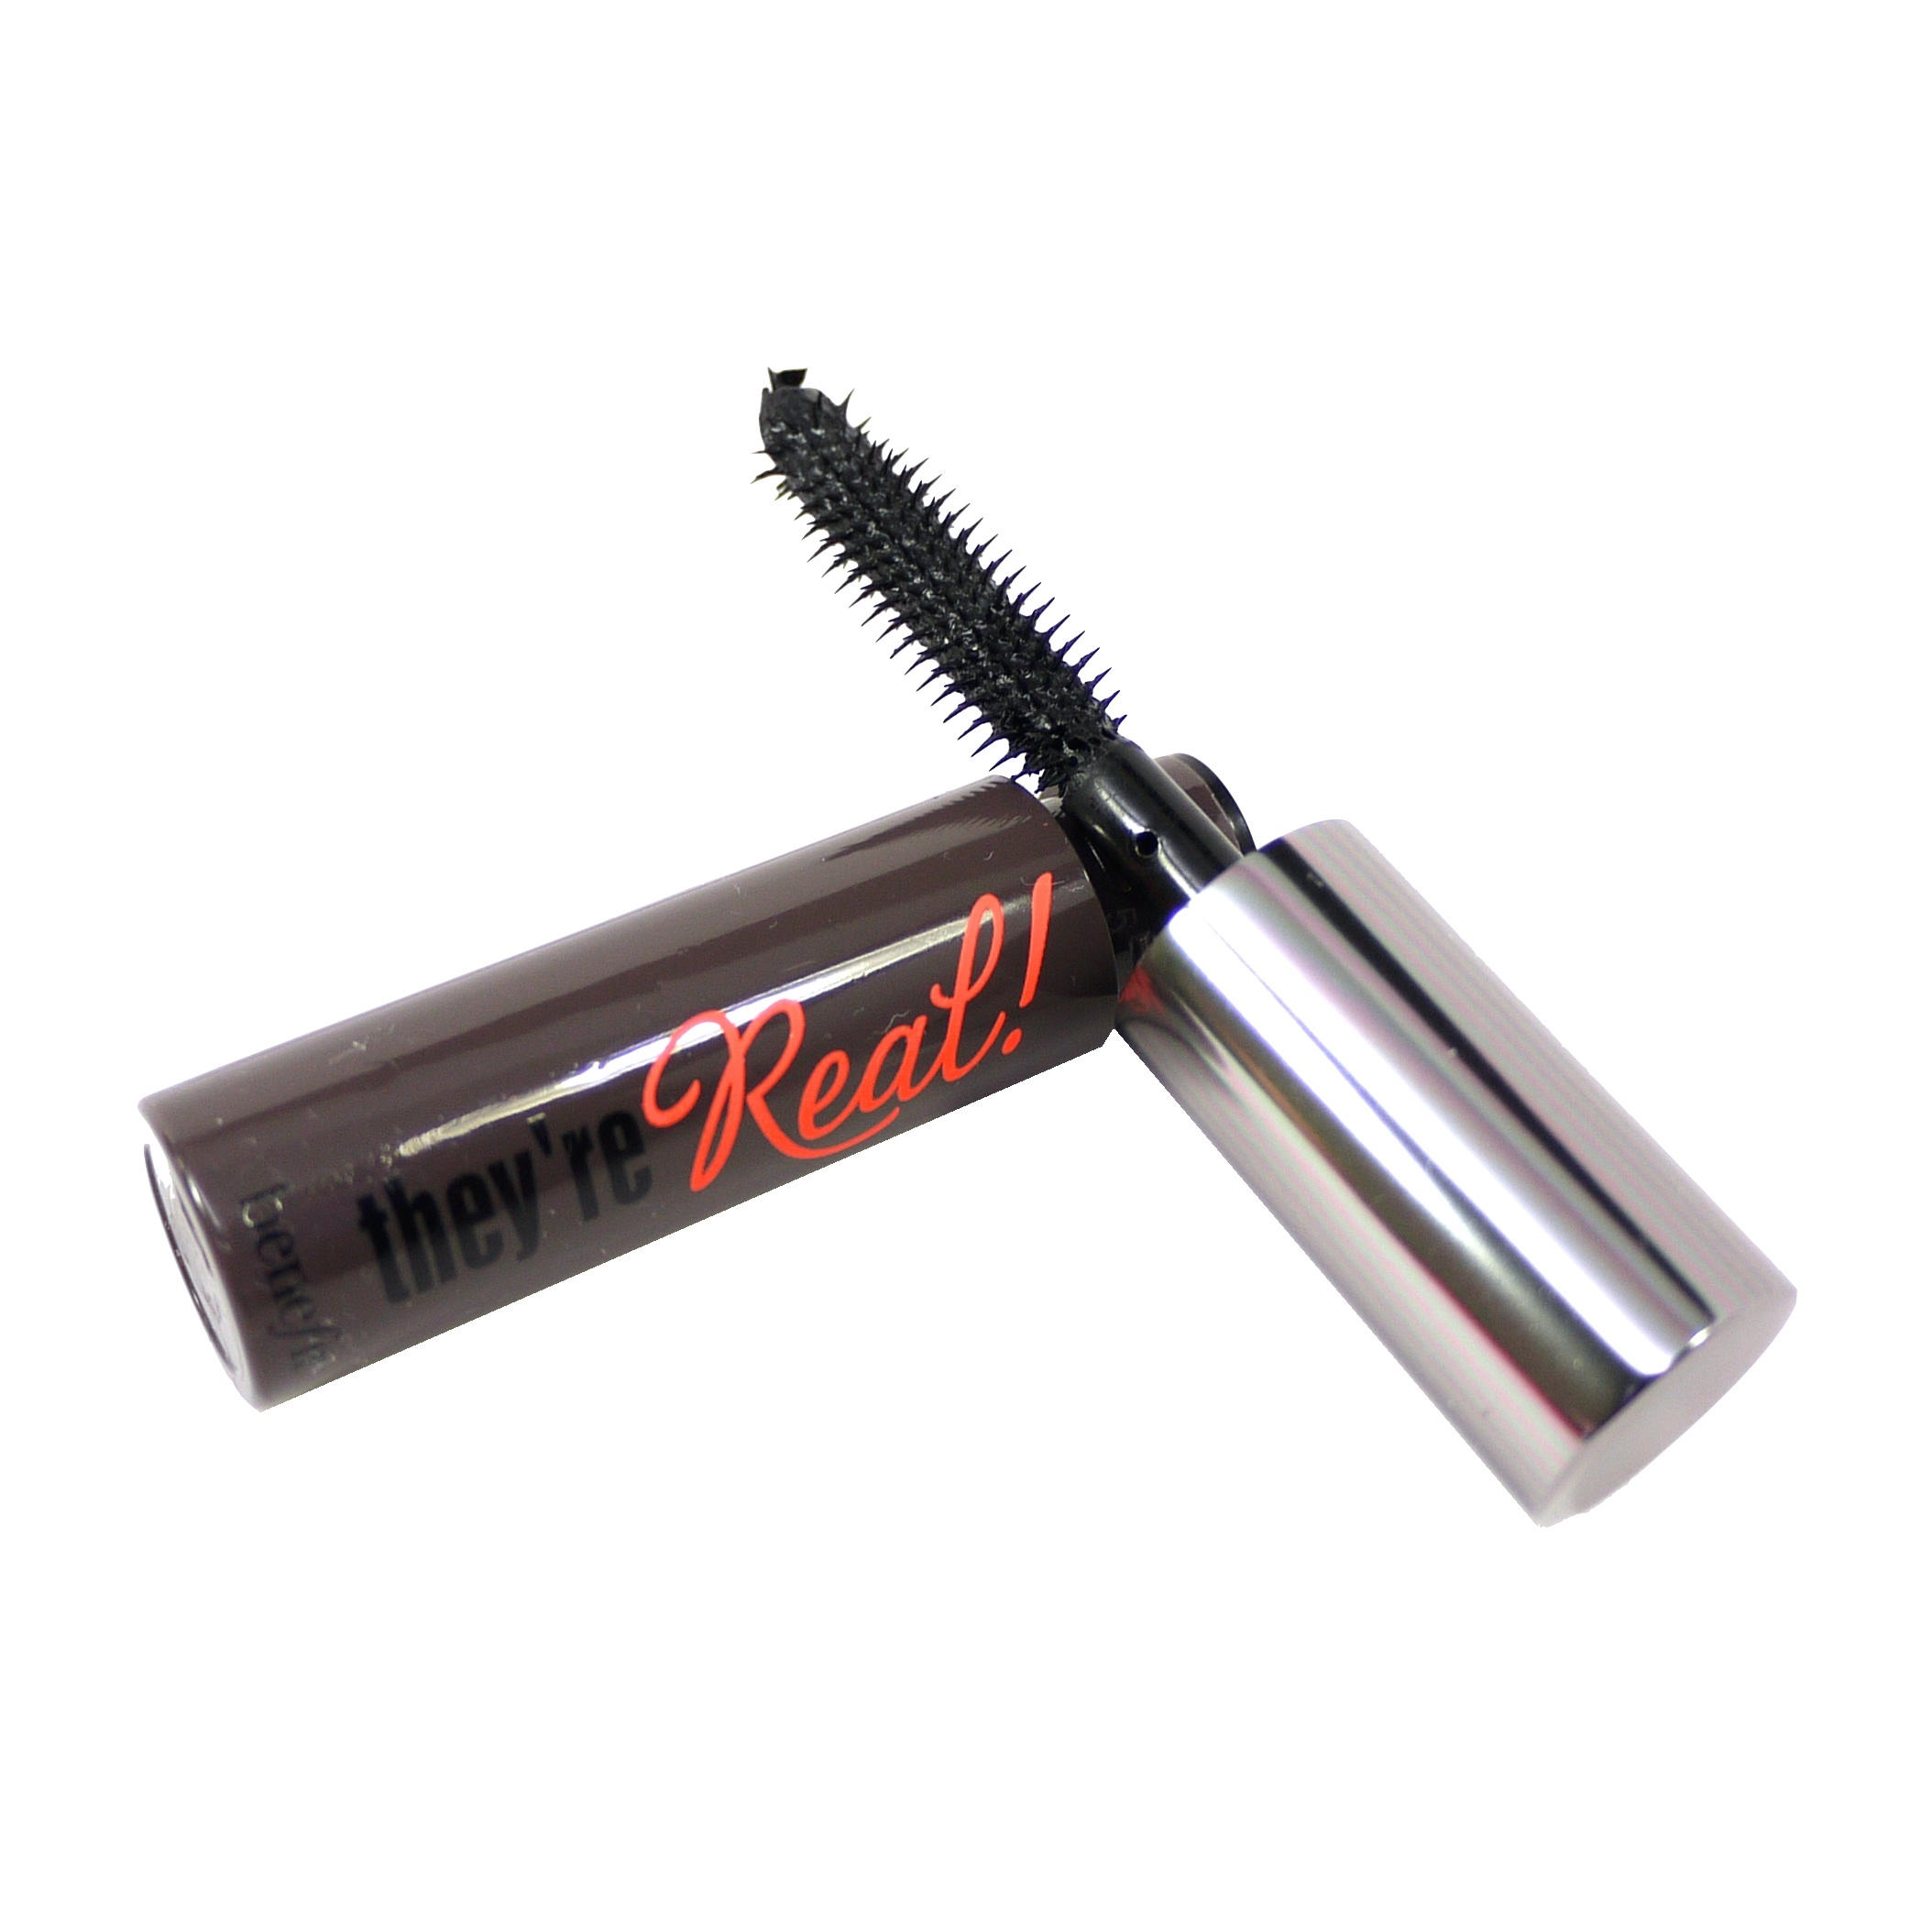 Benefit Mascara They're Real! 3g | Glambot.com - Best deals